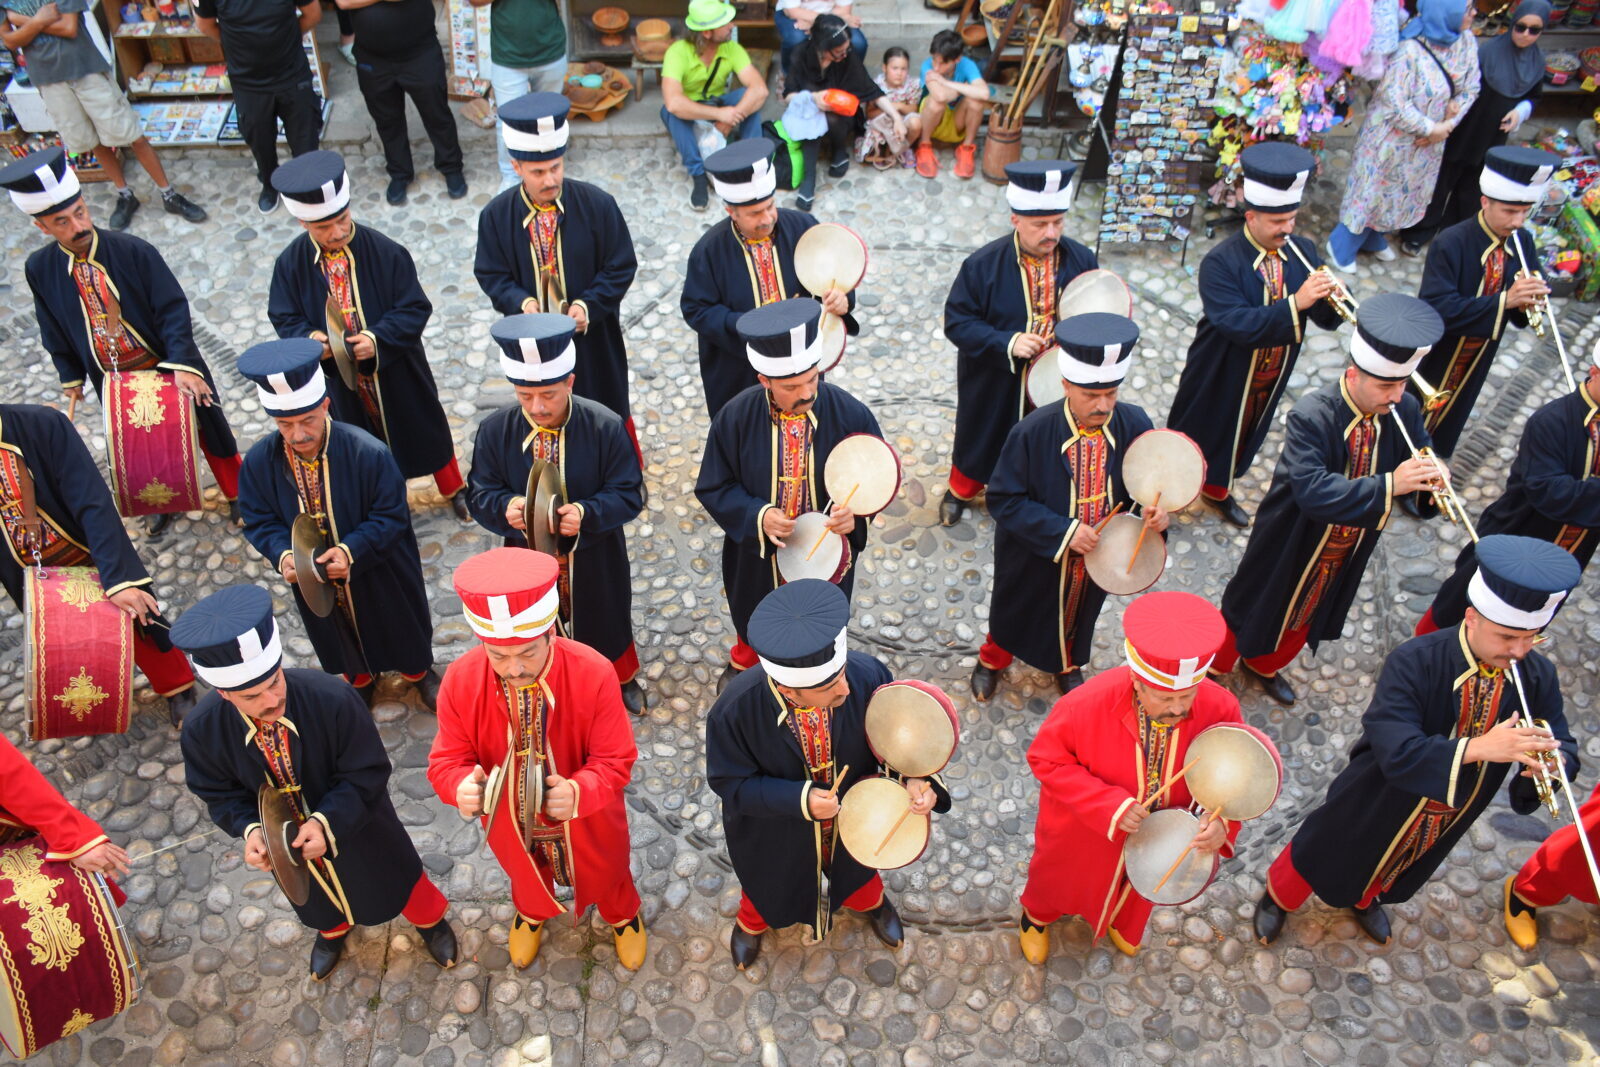 Legacy of 'Mehter': Turkish military bands and their cultural impact